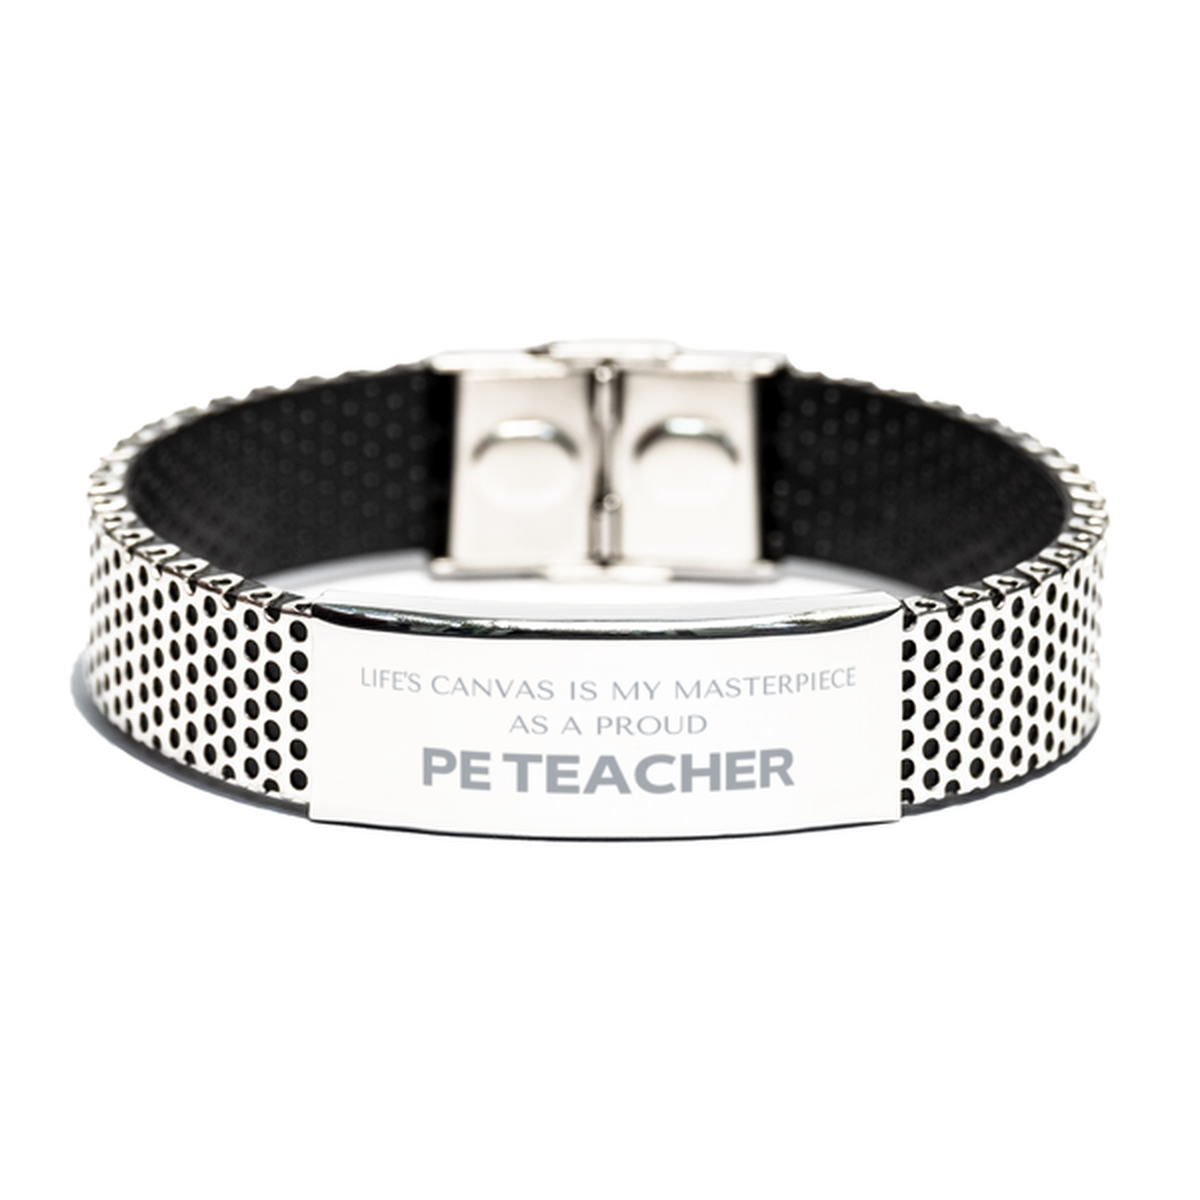 Proud PE Teacher Gifts, Life's canvas is my masterpiece, Epic Birthday Christmas Unique Stainless Steel Bracelet For PE Teacher, Coworkers, Men, Women, Friends